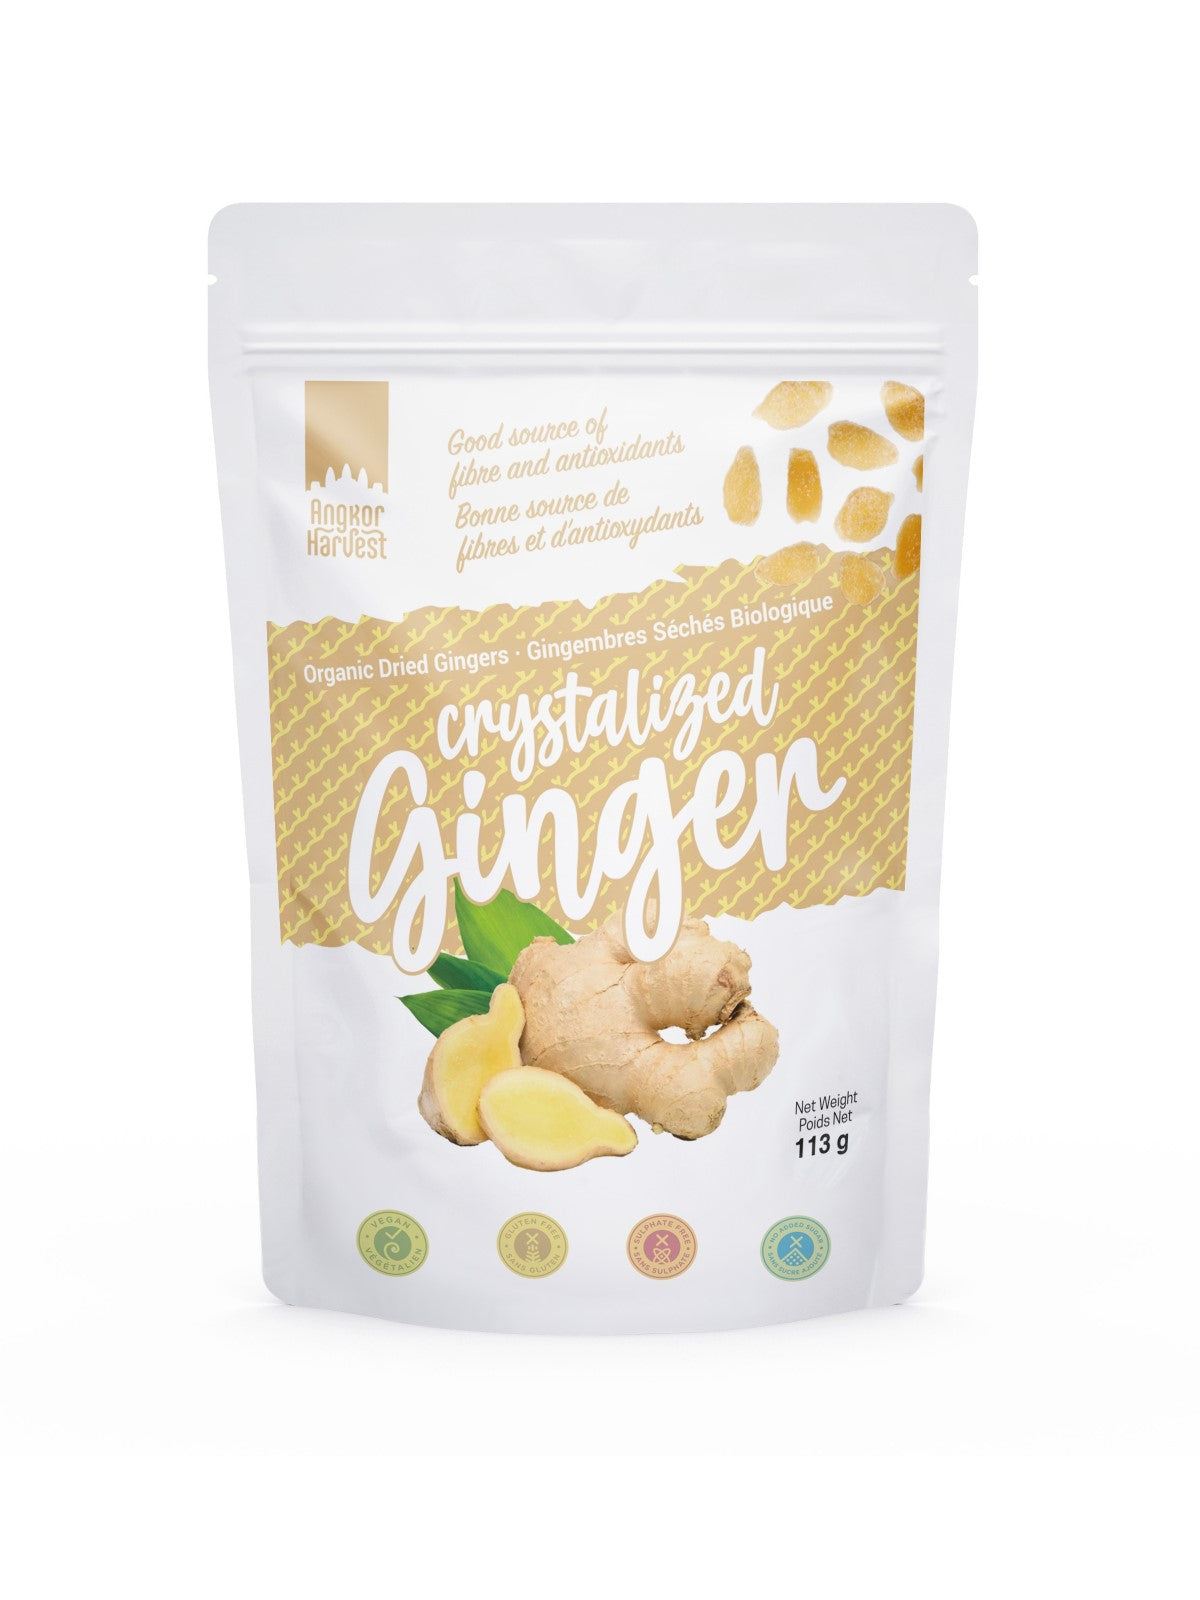 Organic Dried Ginger, Crystallized